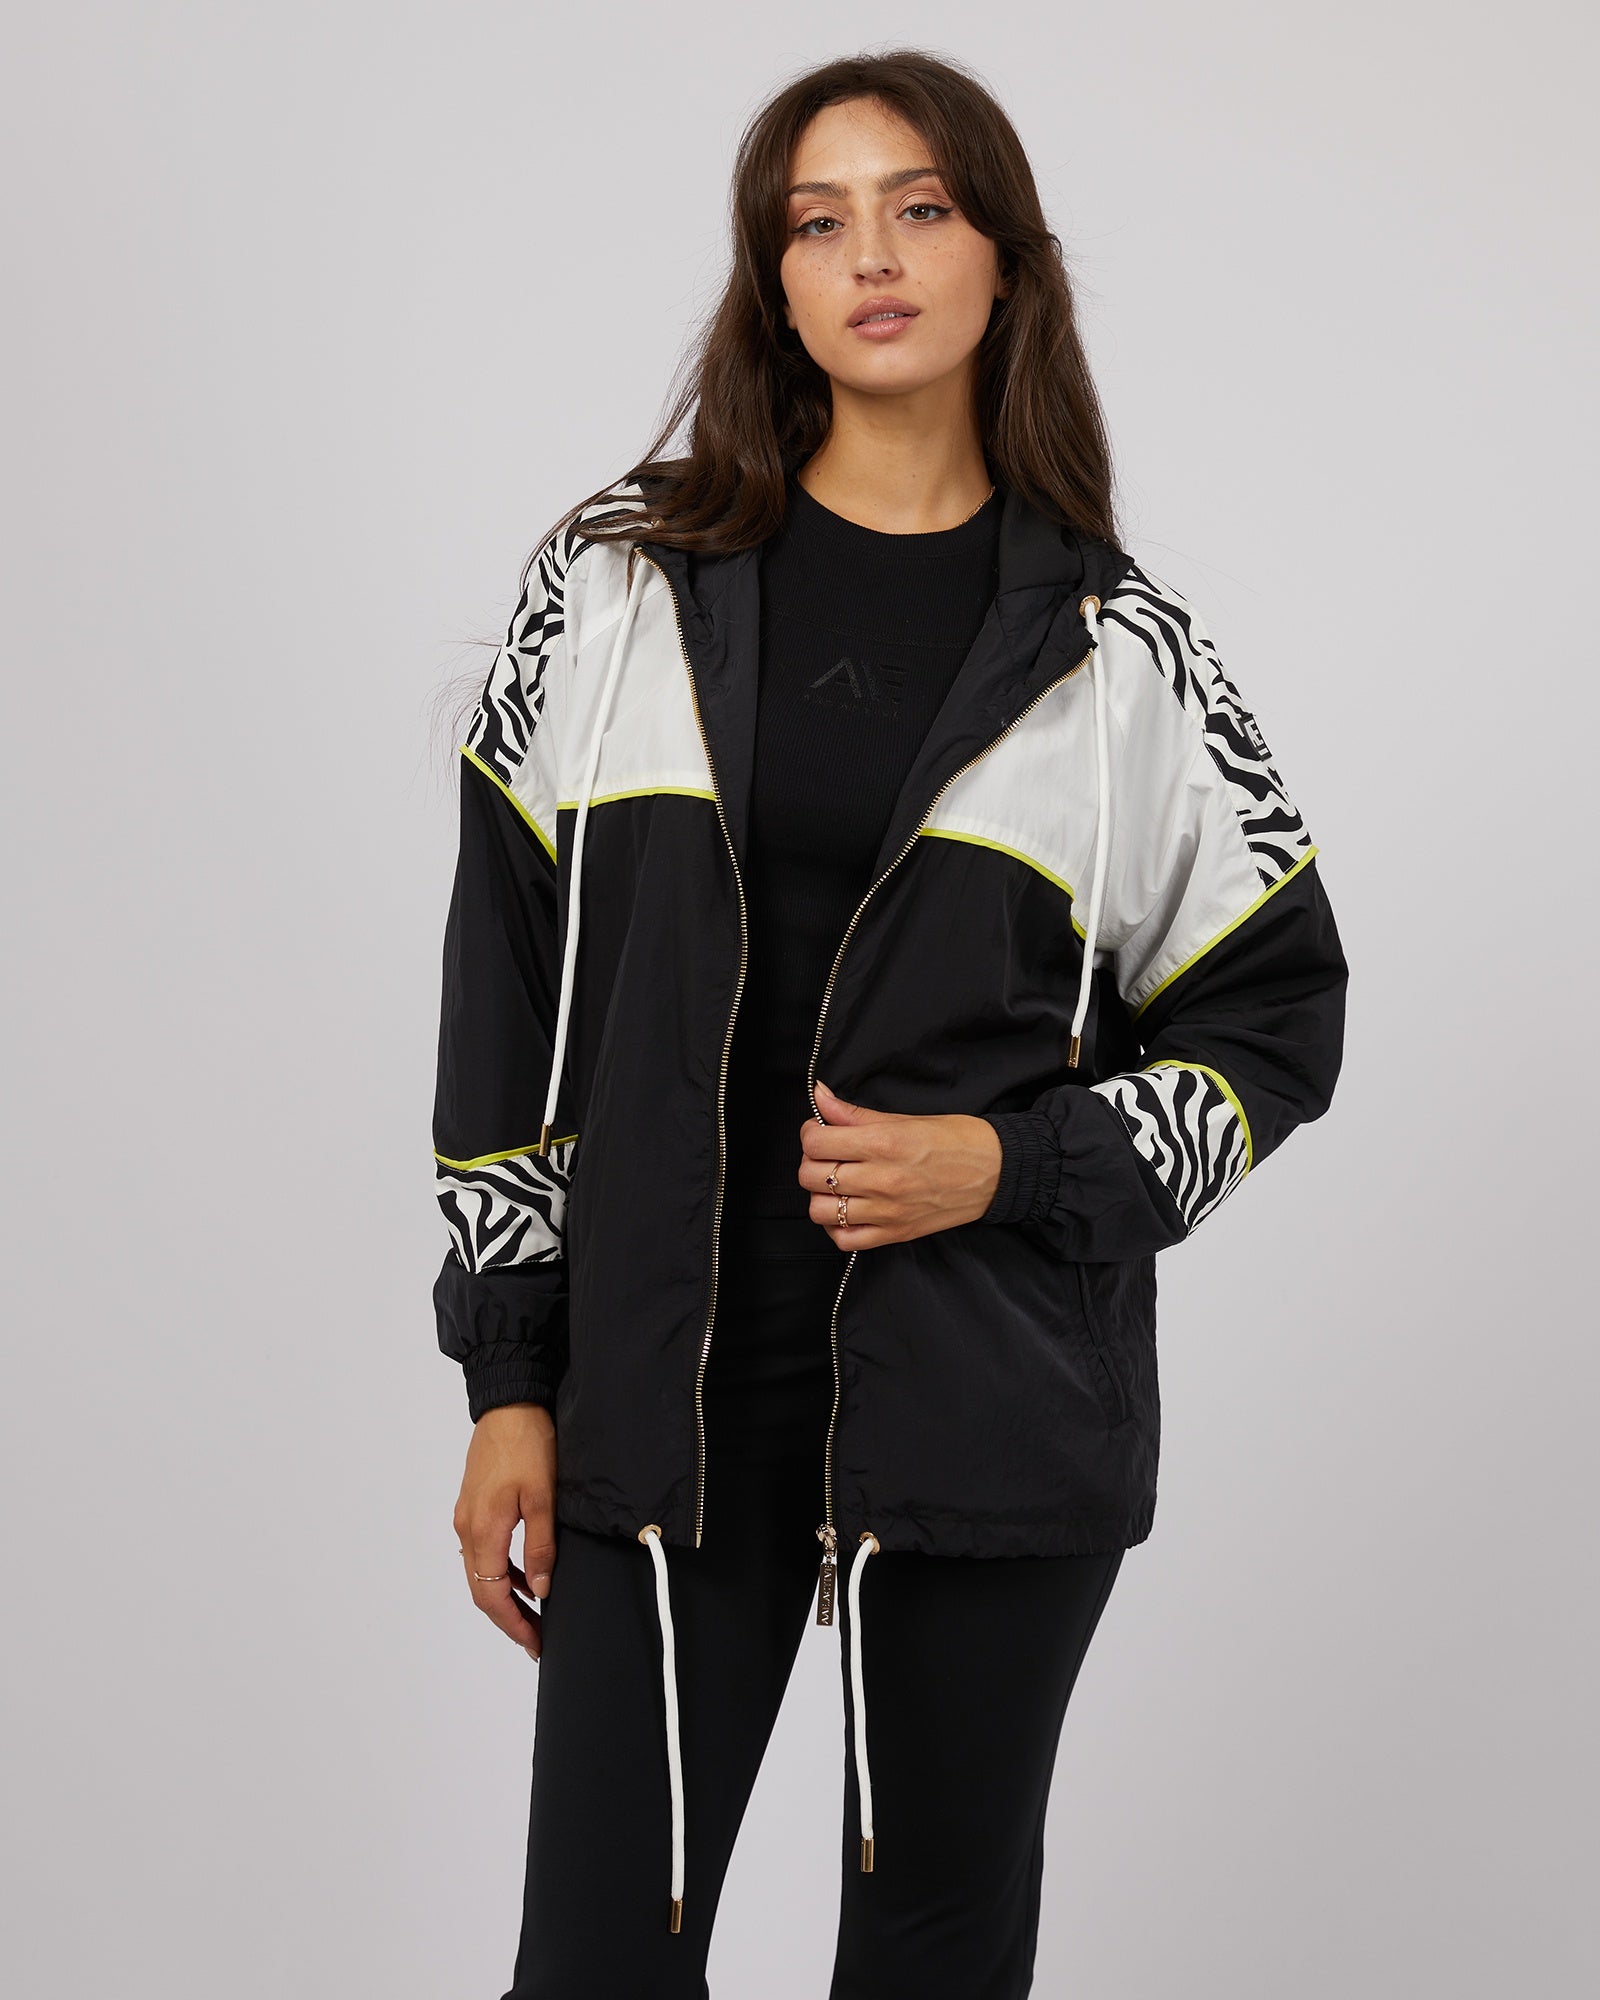 Parker Spray Jacket / Black | All About Eve All About Eve